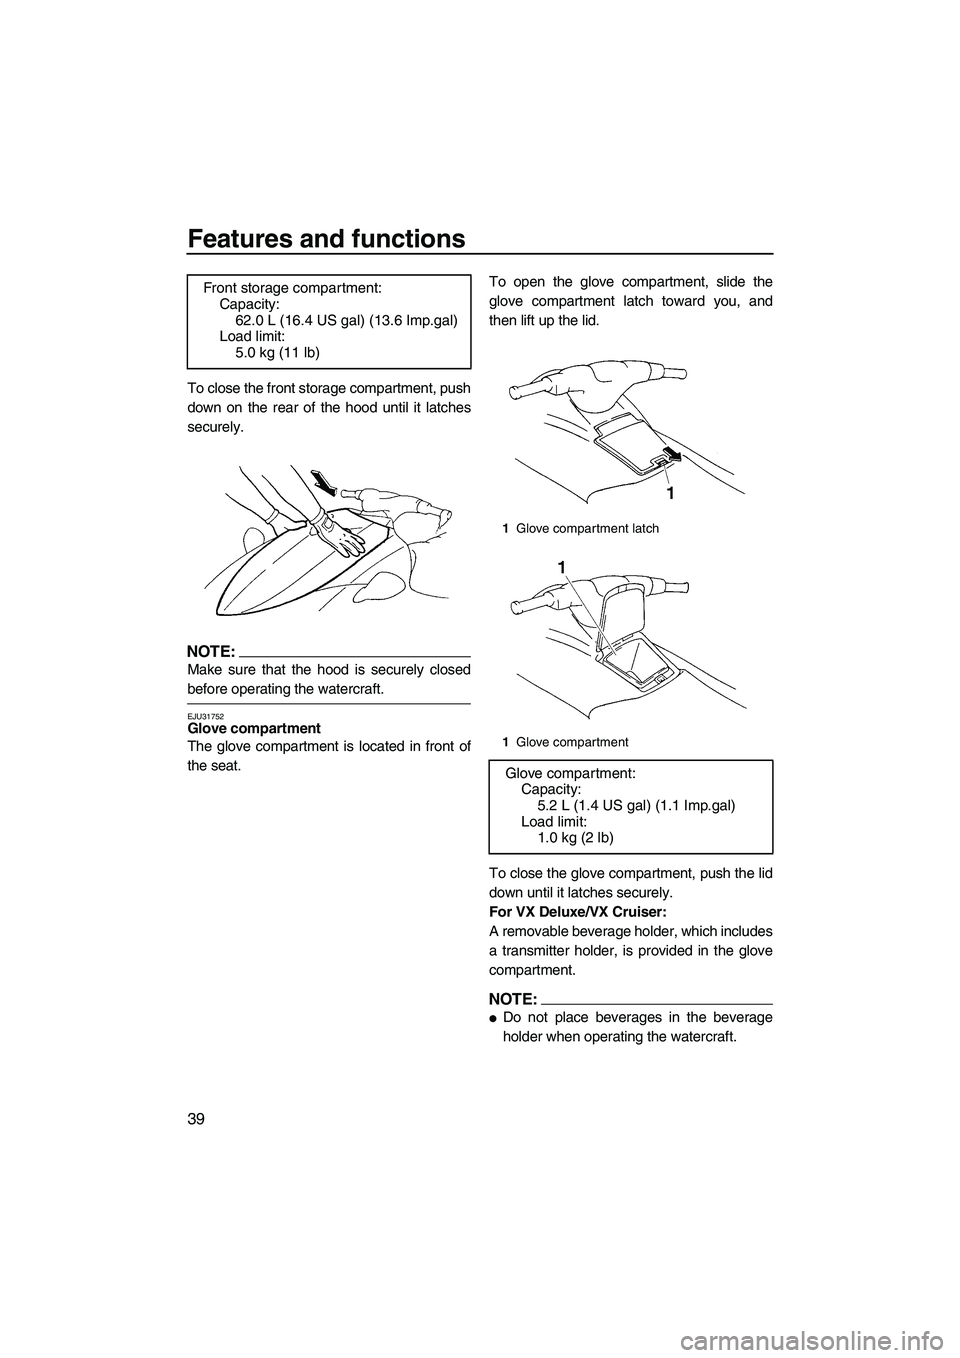 YAMAHA VX CRUISER 2007 Service Manual Features and functions
39
To close the front storage compartment, push
down on the rear of the hood until it latches
securely.
NOTE:
Make sure that the hood is securely closed
before operating the wat